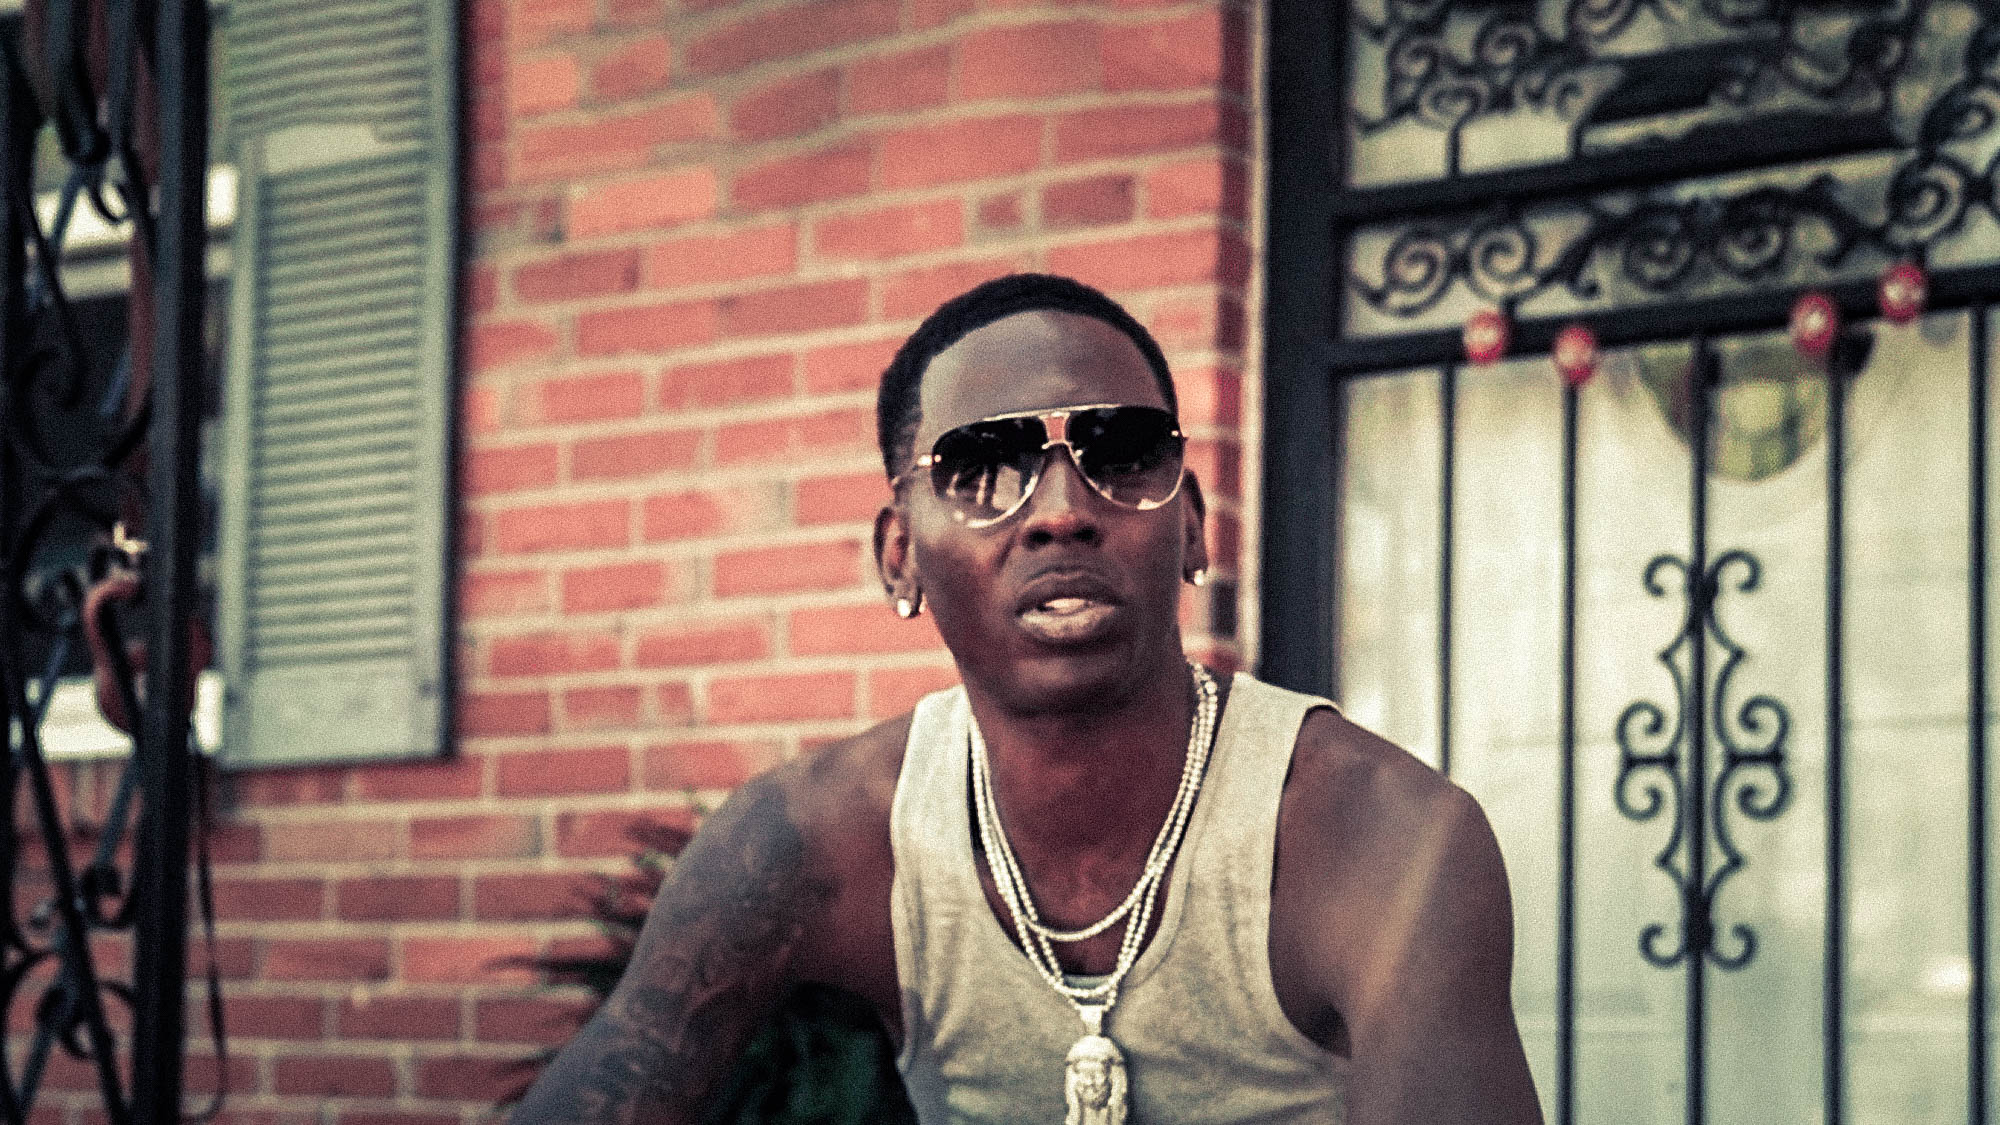 Young Dolph Gets Tunnel Renamed In His Honor At Jackson State University